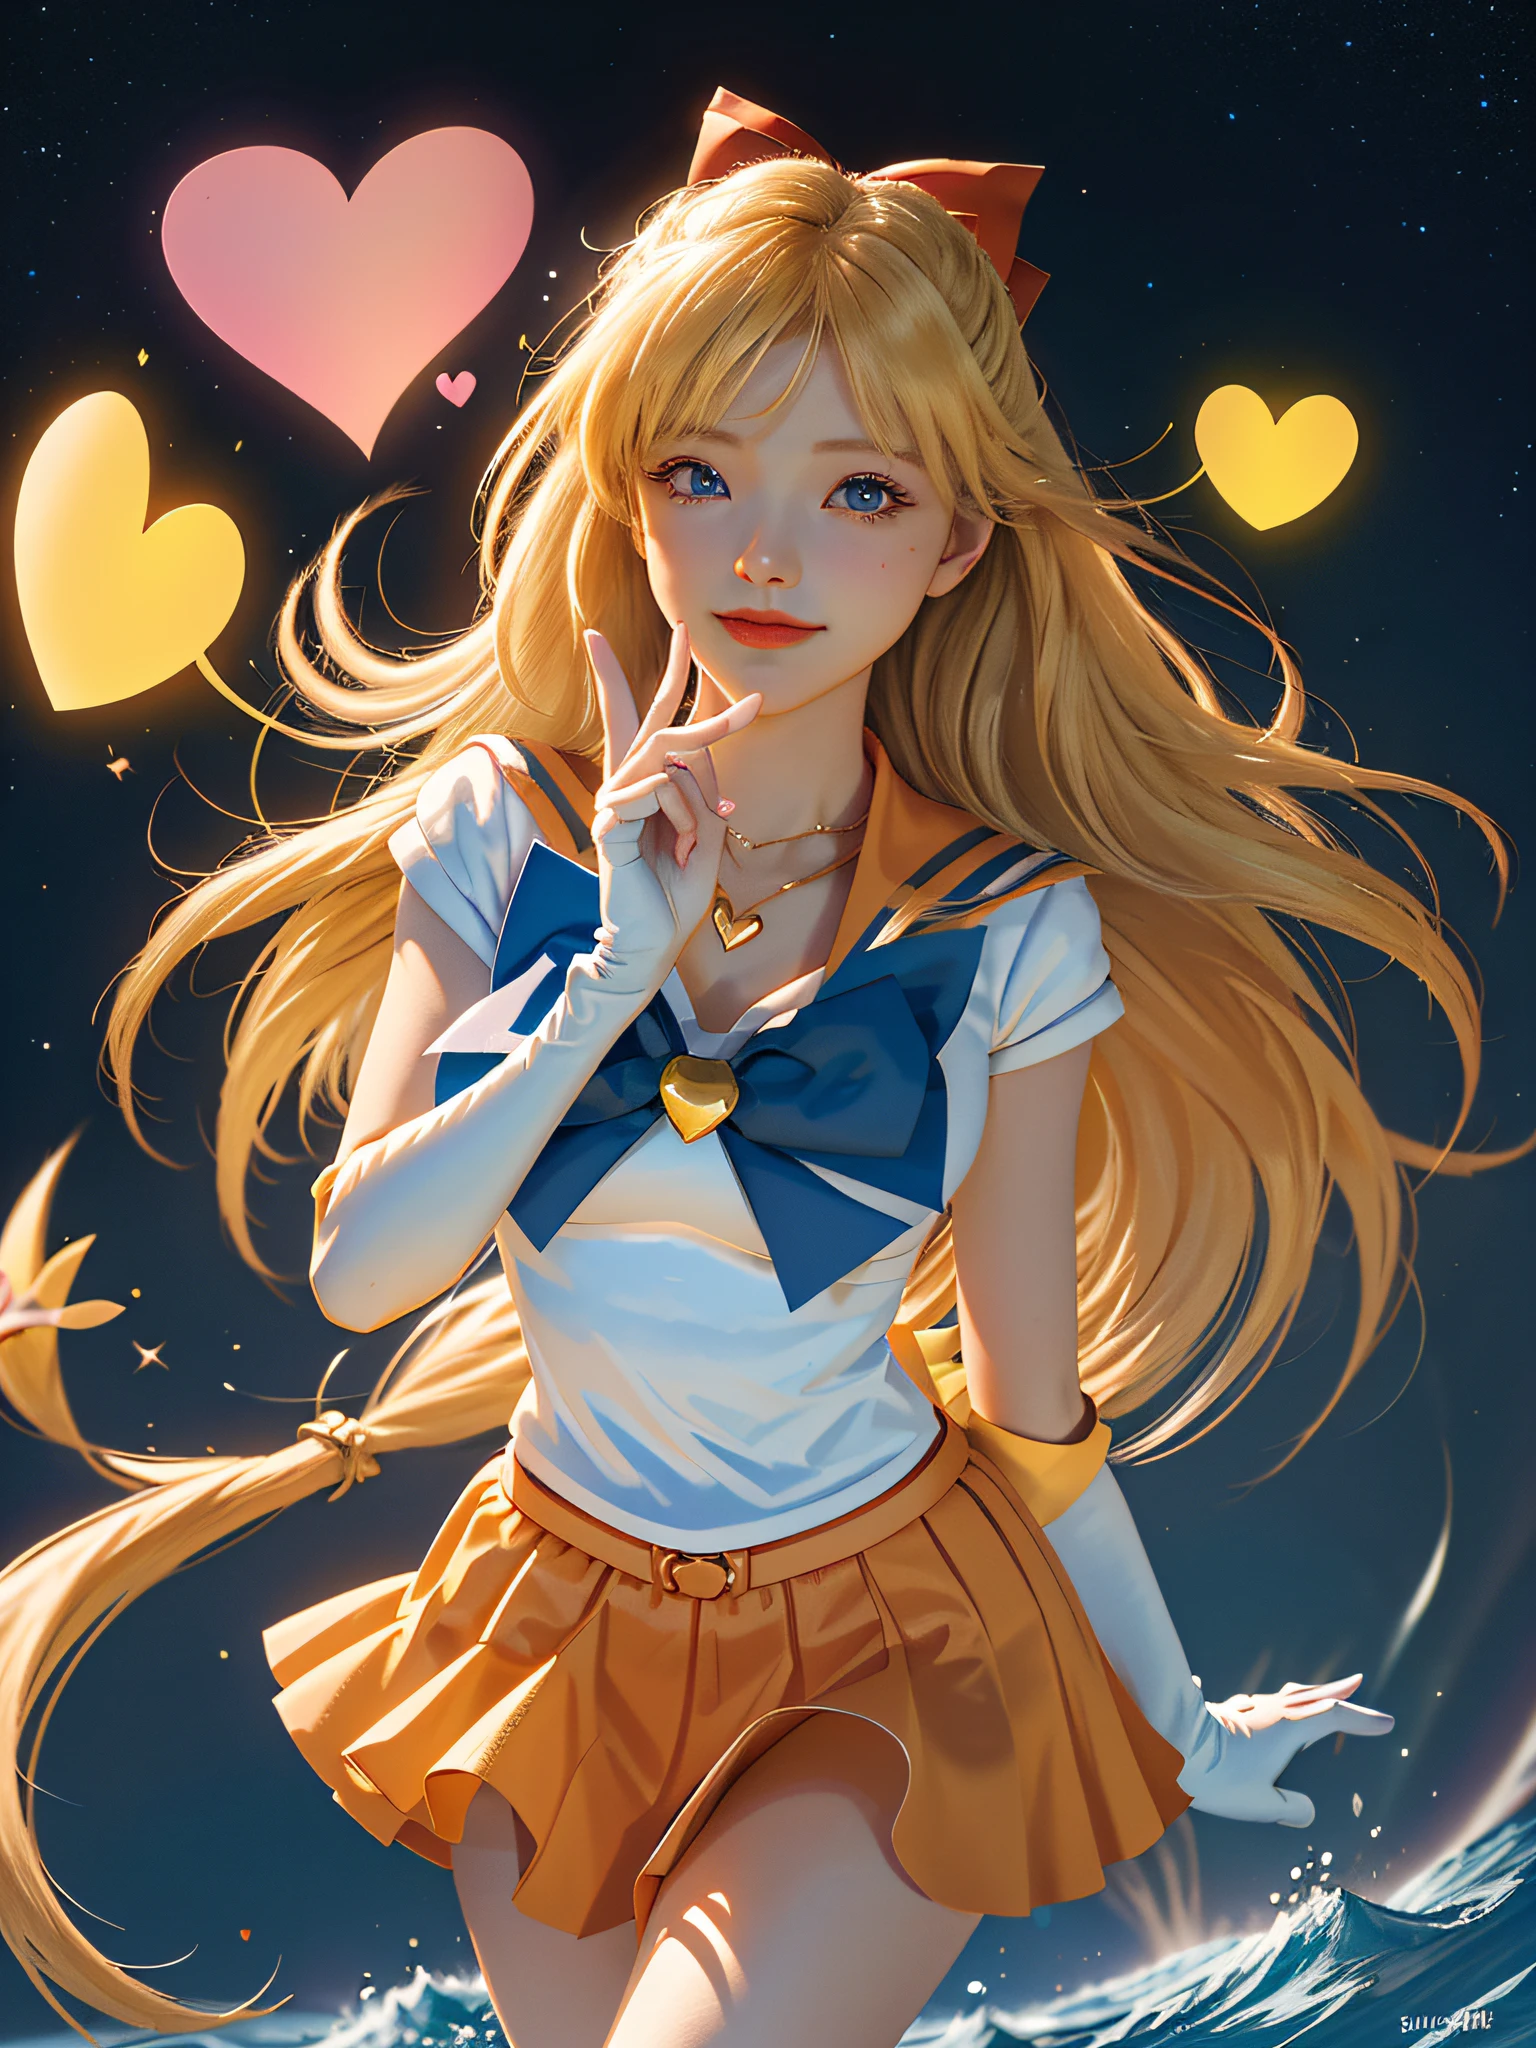 (Masterpiece, best quality; 1.3), extremely detailed CG, super detailed, 1 girl, solo, smile, looking at the audience, stylish Ungle, long blonde hair, blue eyes,
SV1, sailor senishi uniform, orange skirt, elbow gloves, tiara, orange sailor collar, red bow, orange necklace, white gloves, jewelry,
many hearts, facial focus, venus, tornado, abstract background, heart storm, halt beam, heart bubble, heart bath, halt star, heart flower, heart light, heart world, heart background, galaxy background, heart weapon, heart halo,